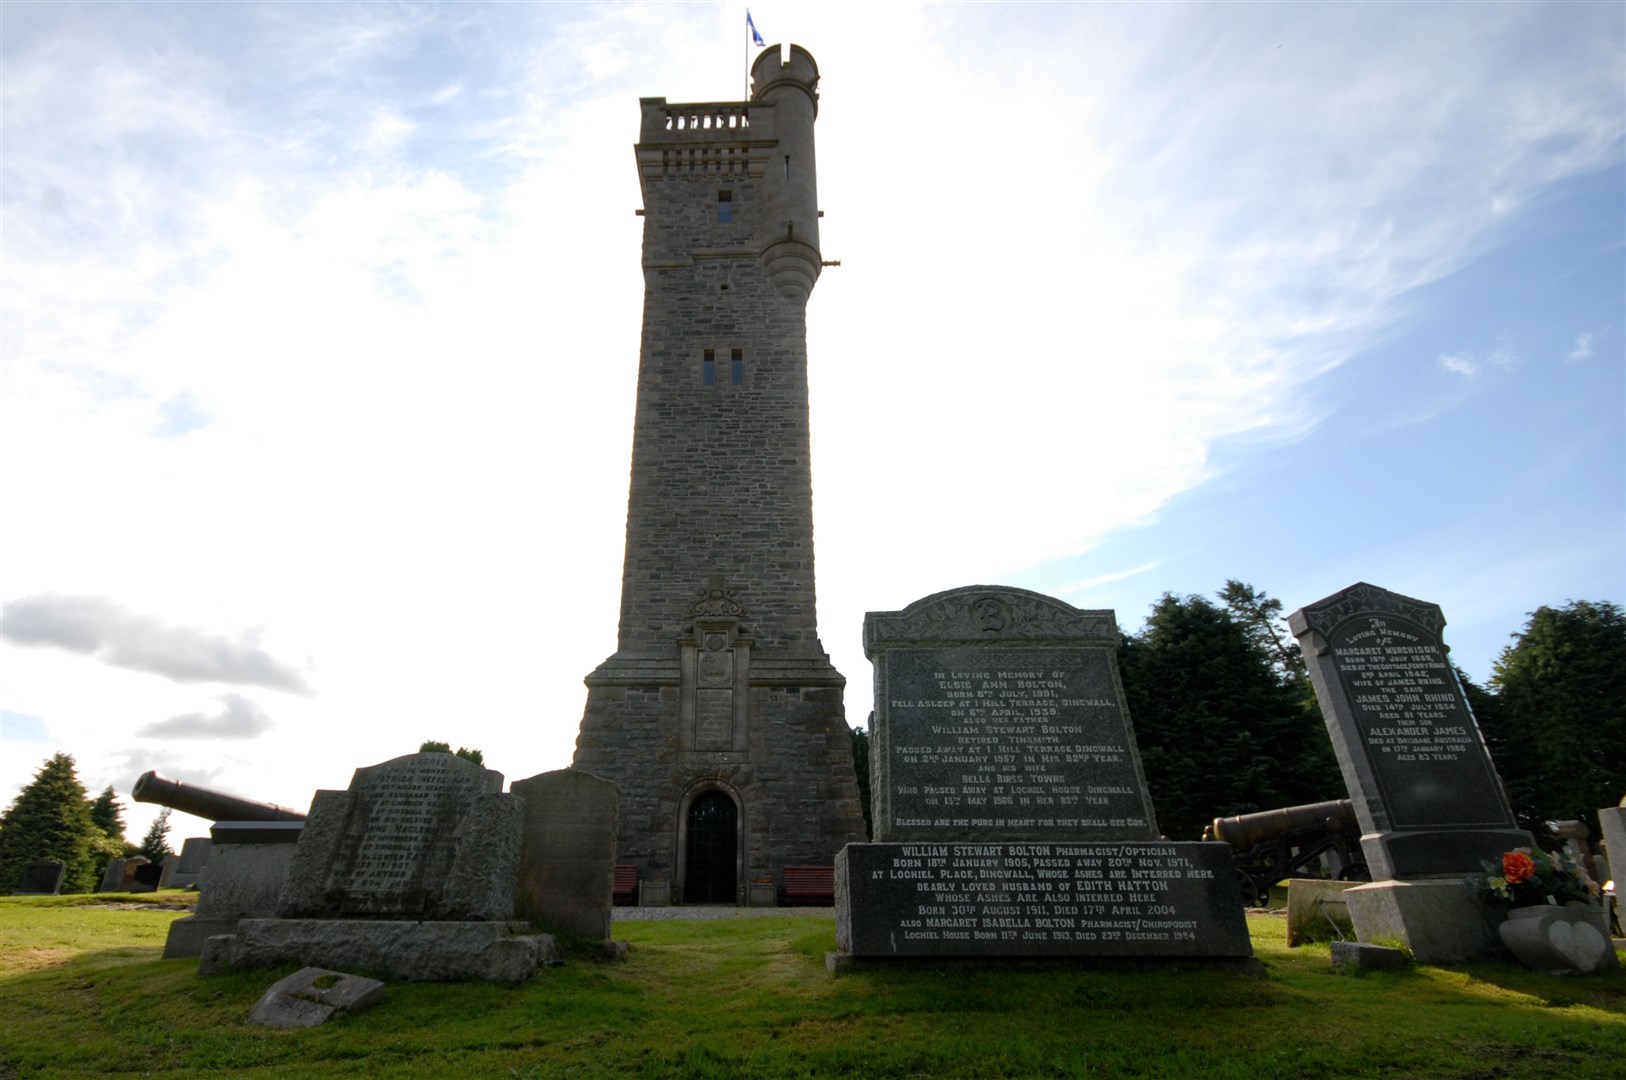 See: Copy By: North Star The Hector MacDonald Memorial Tower, Dingwall Cemetery Pic By Iona Spence SPP Staff Photographer *** Local Caption *** The Hector MacDonald Memorial Tower, Dingwall Cemetery